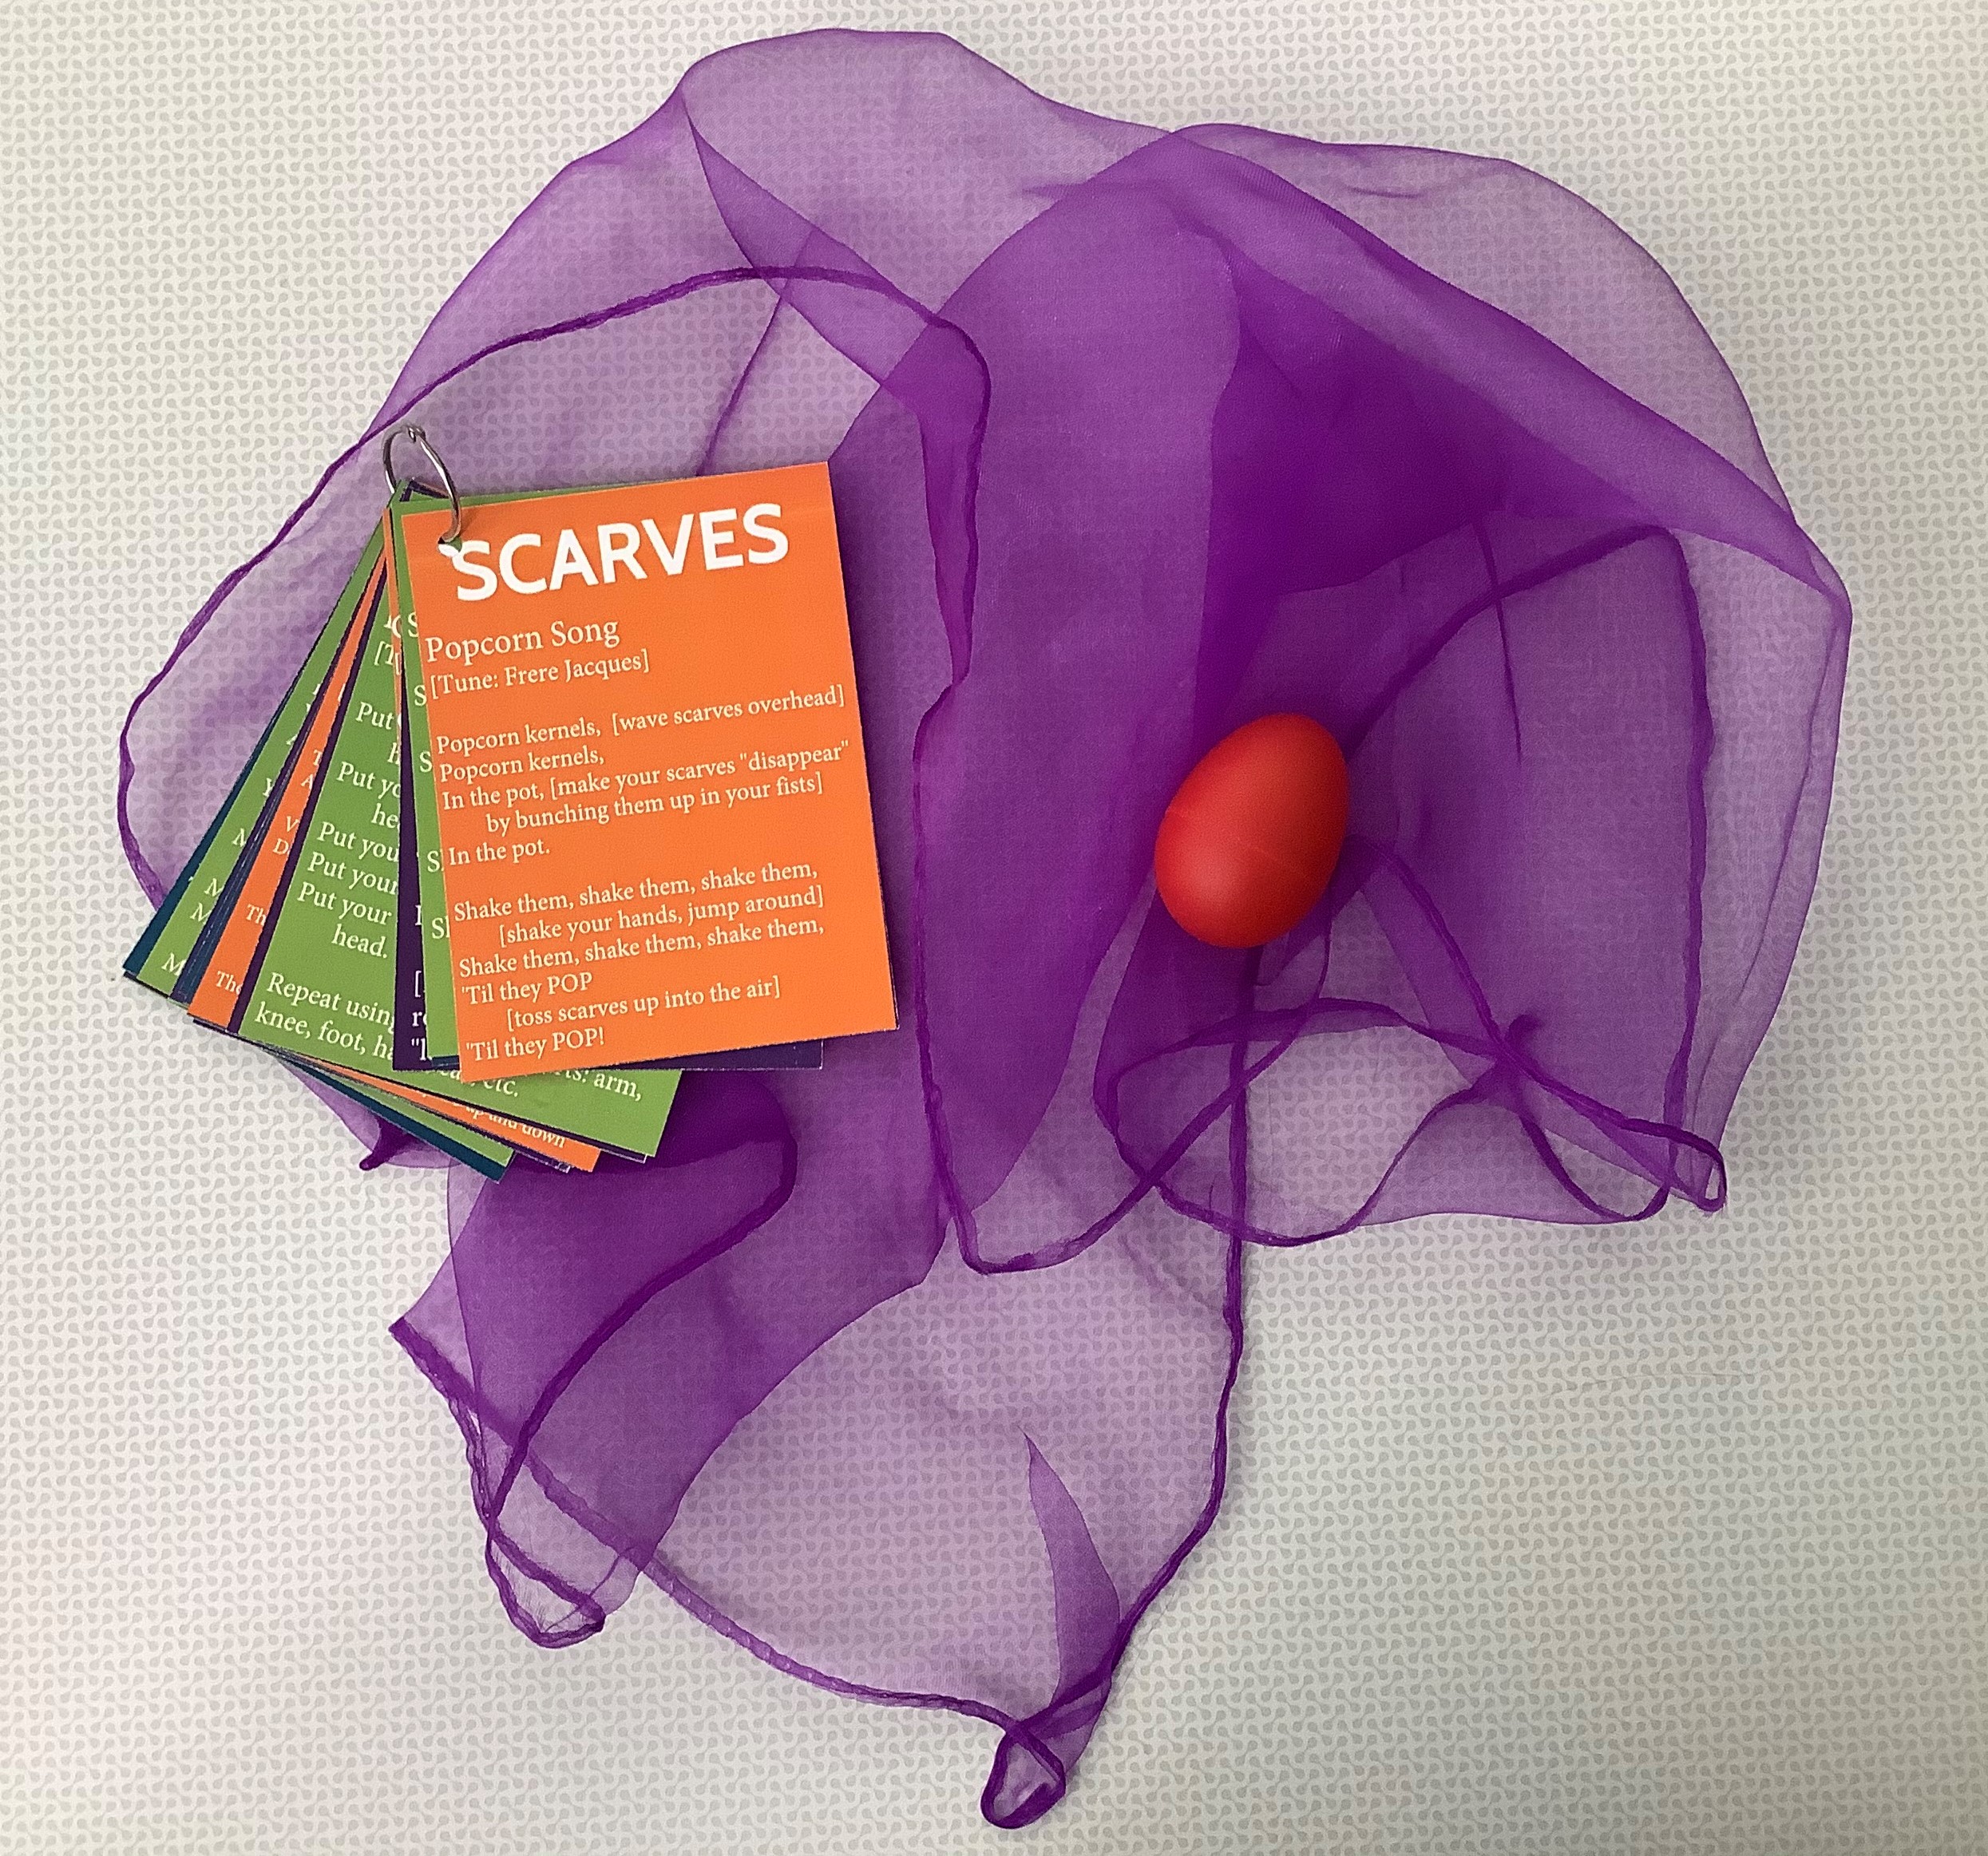 A purple scarf with a shaker egg and a booklet of activities